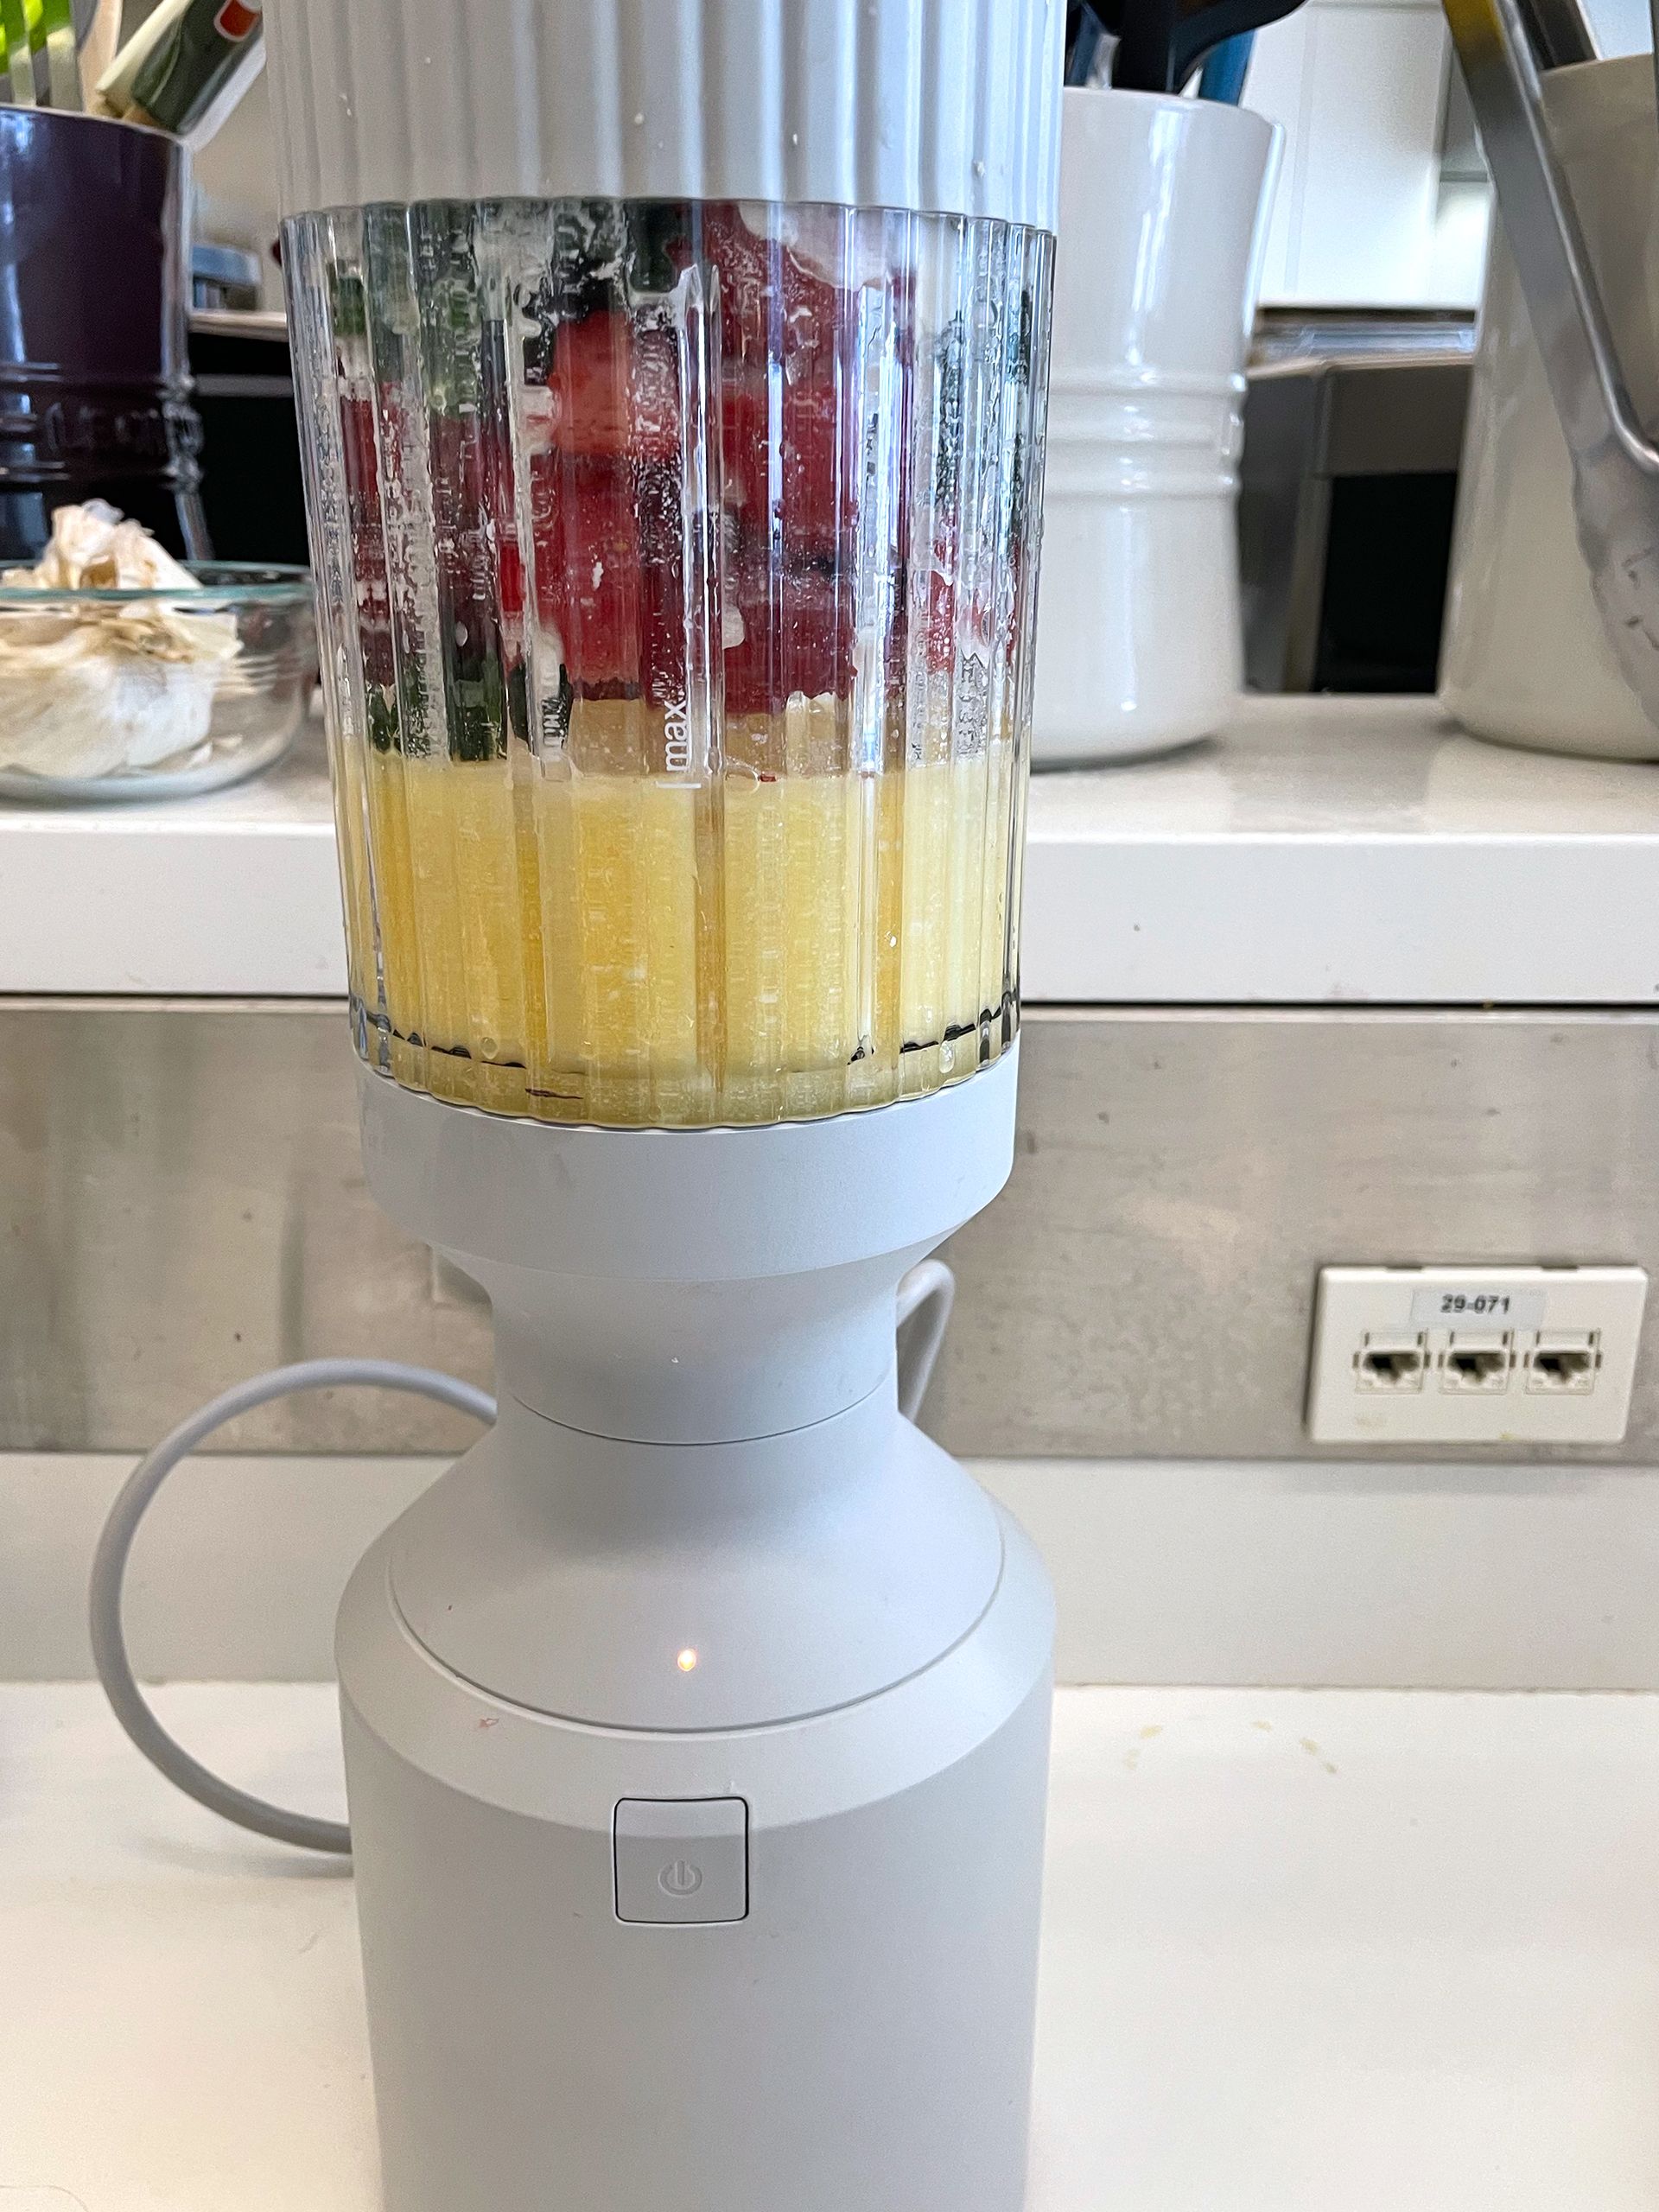 In the Kitchen Creating Recipes With the Beast Blender